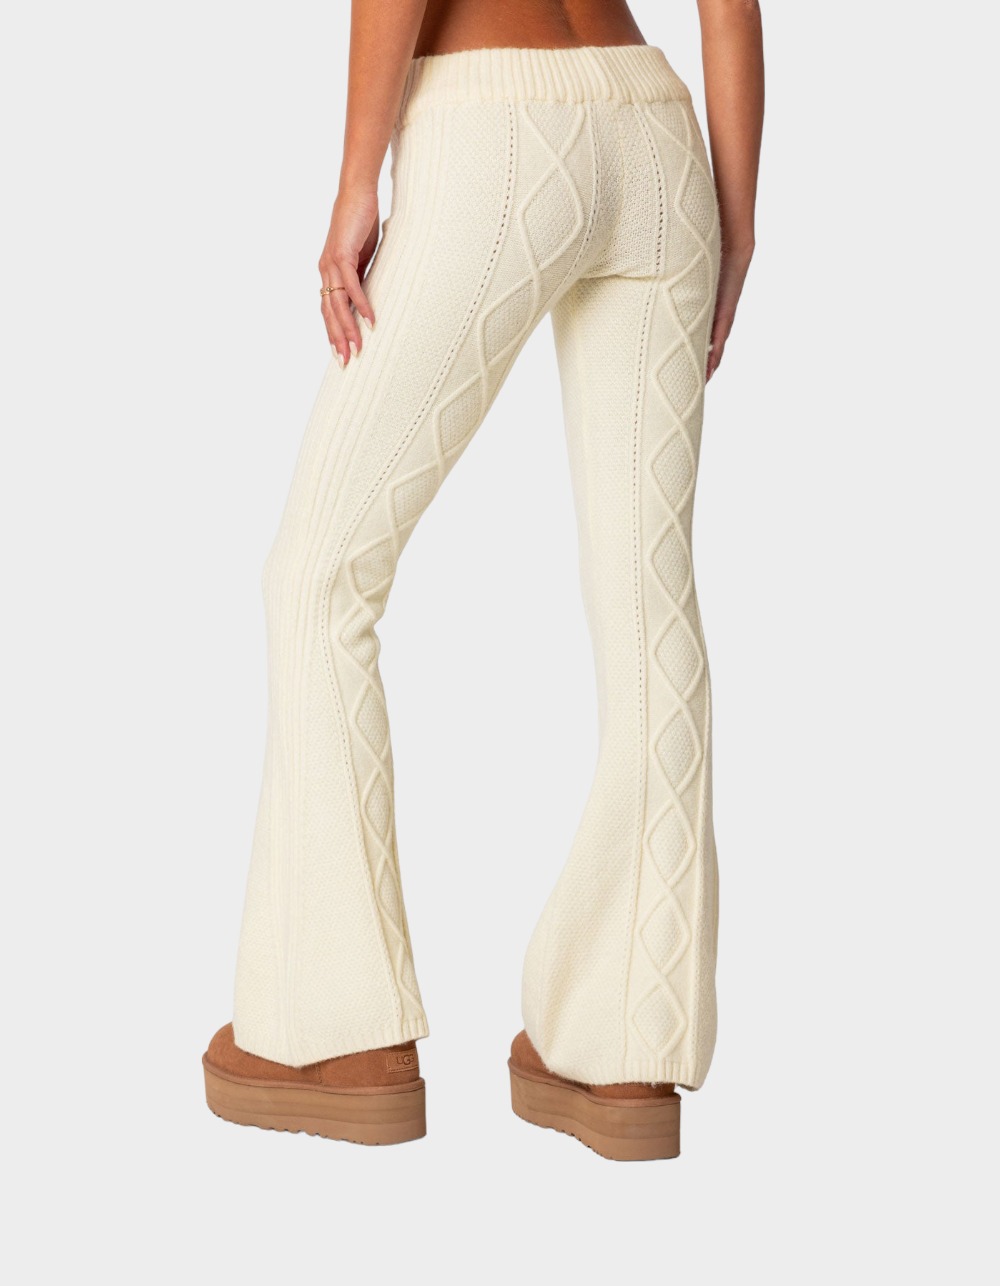 FLARED CABLE KNIT LEGGINGS - Beige